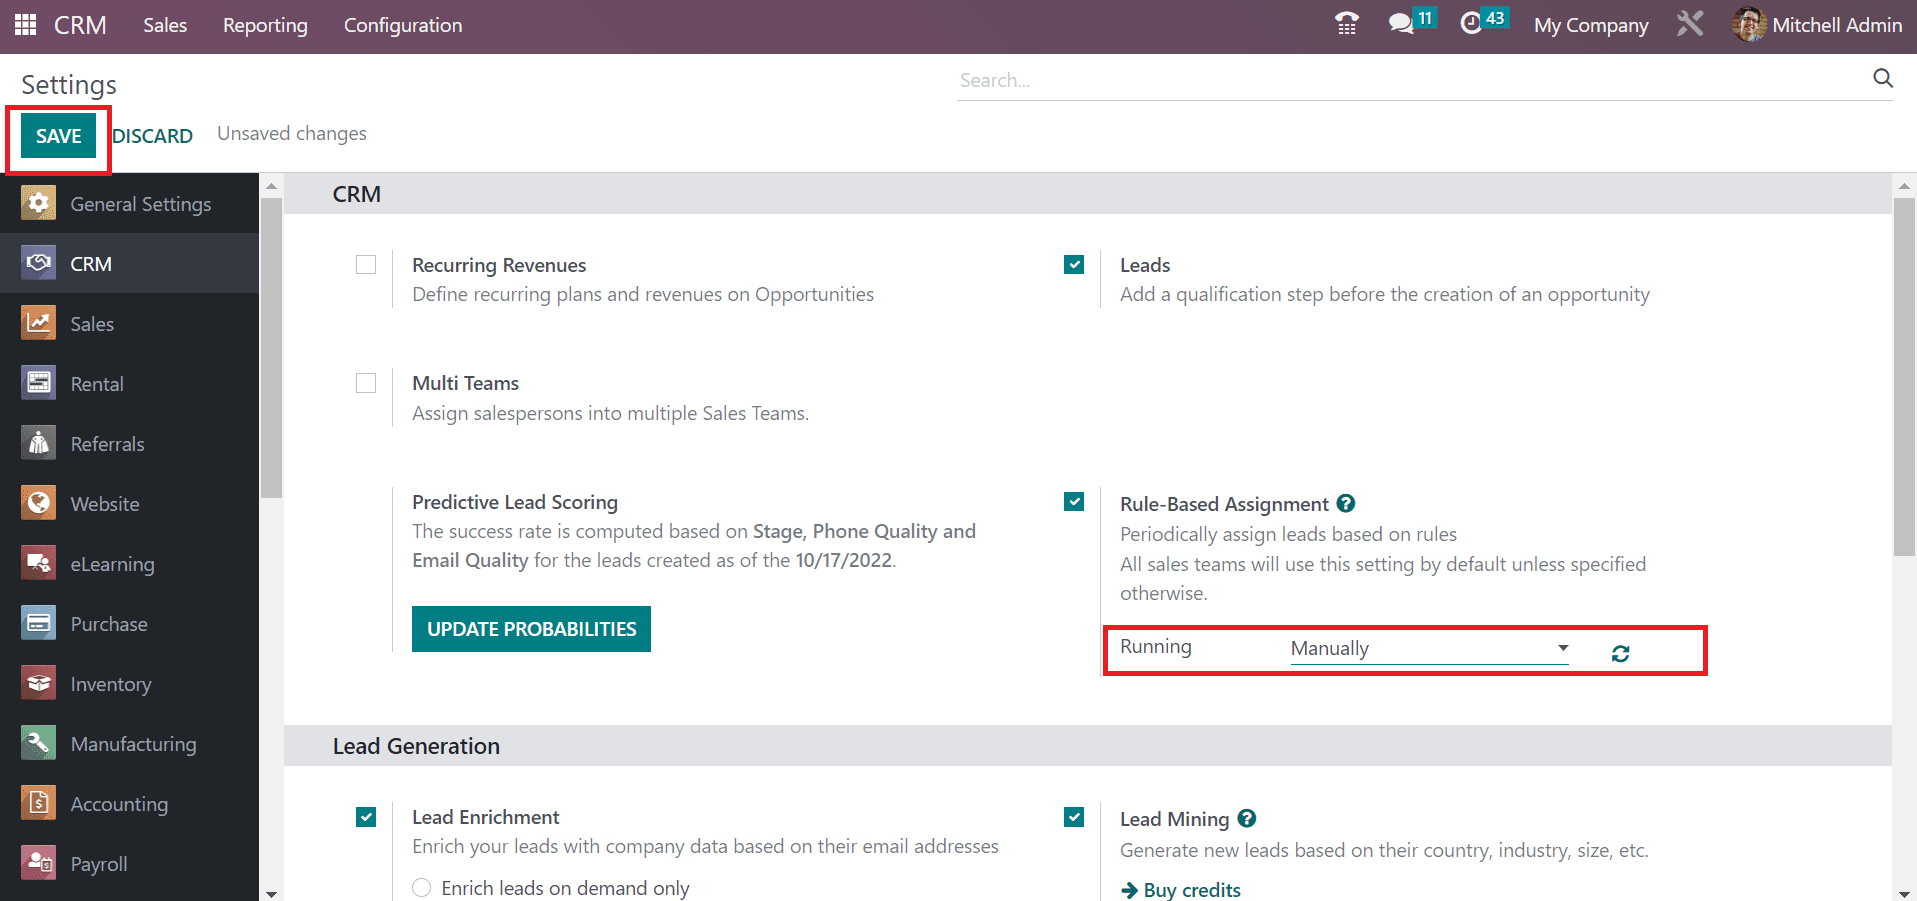 how-to-periodically-assign-leads-based-on-rules-in-odoo-16-crm-5-cybrosys